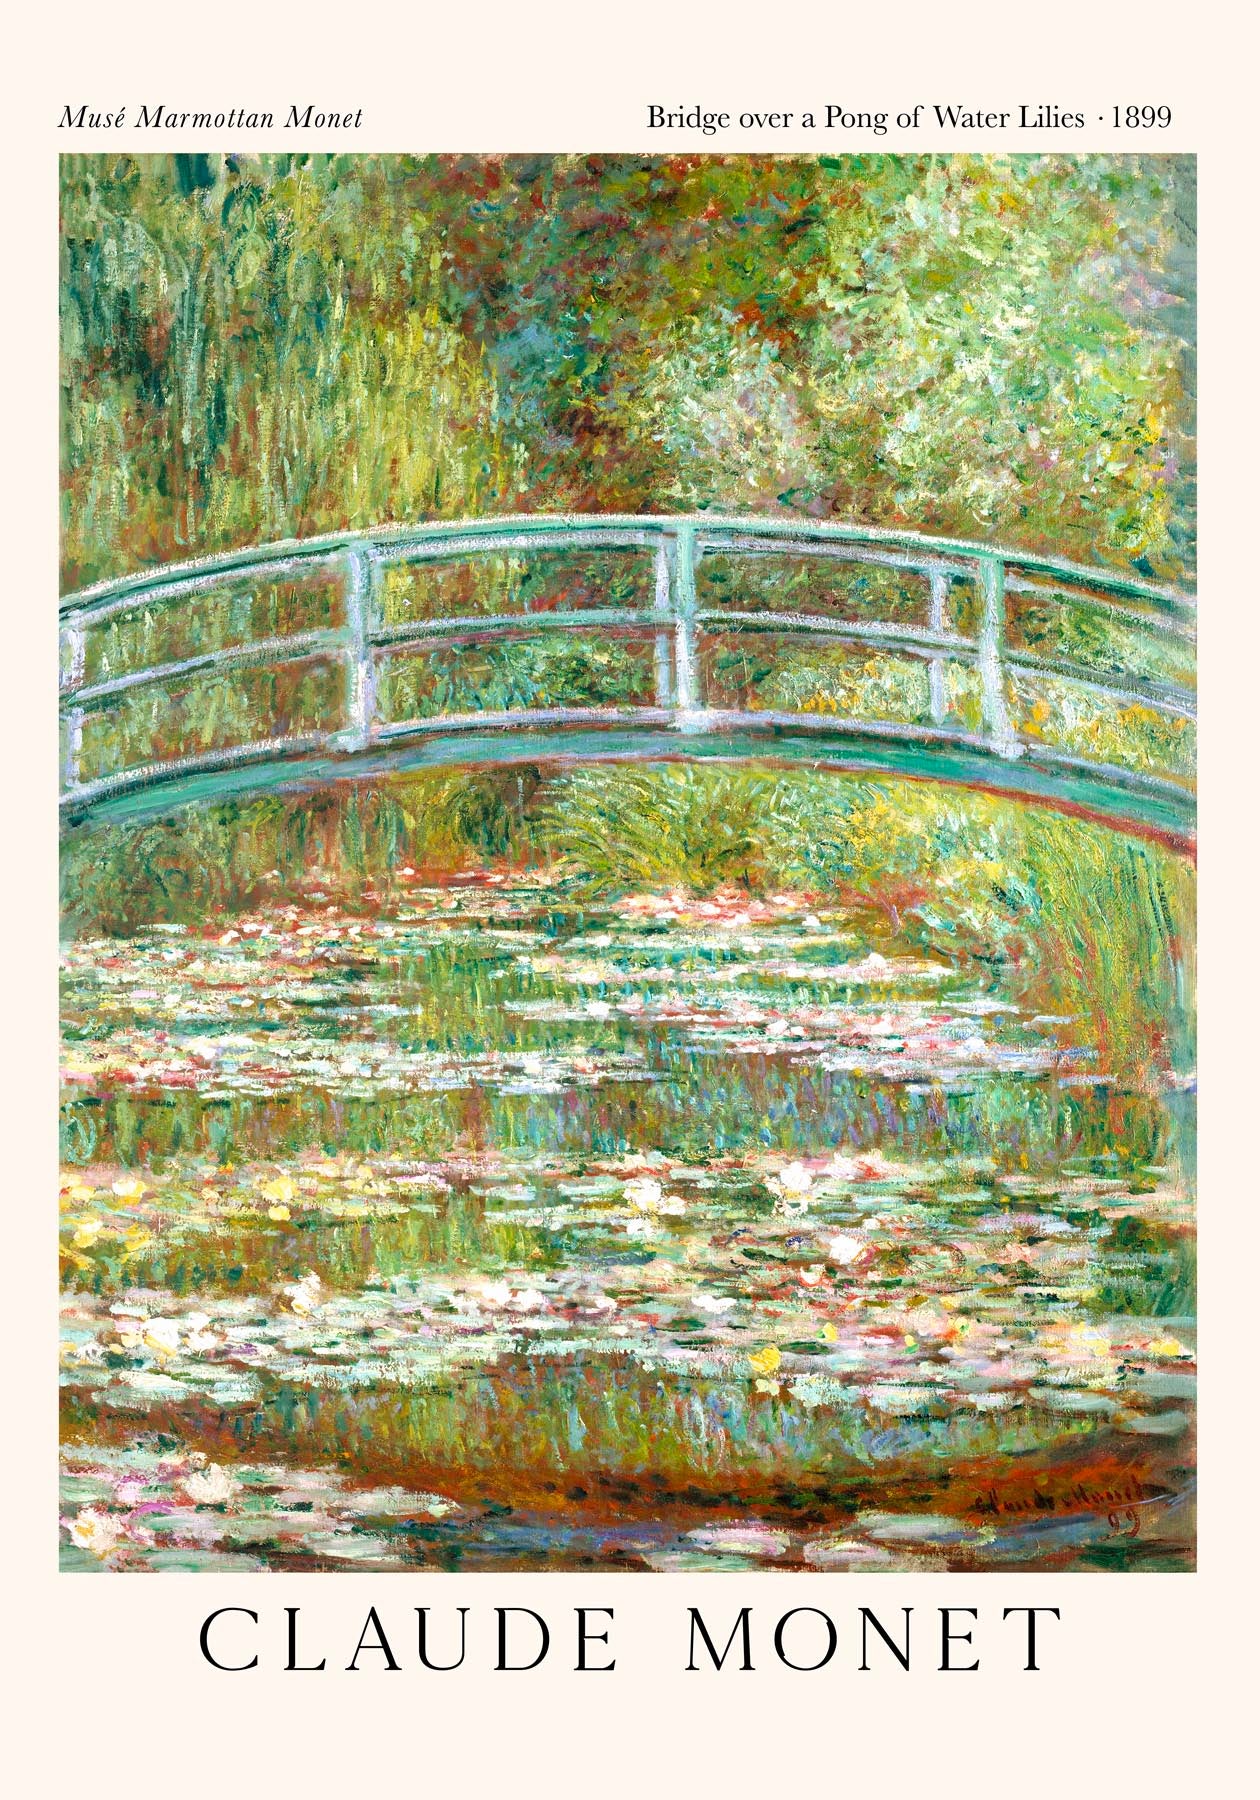 Bridge Over a Pond of Waterlilies by Claude Monet Exhibition Poster